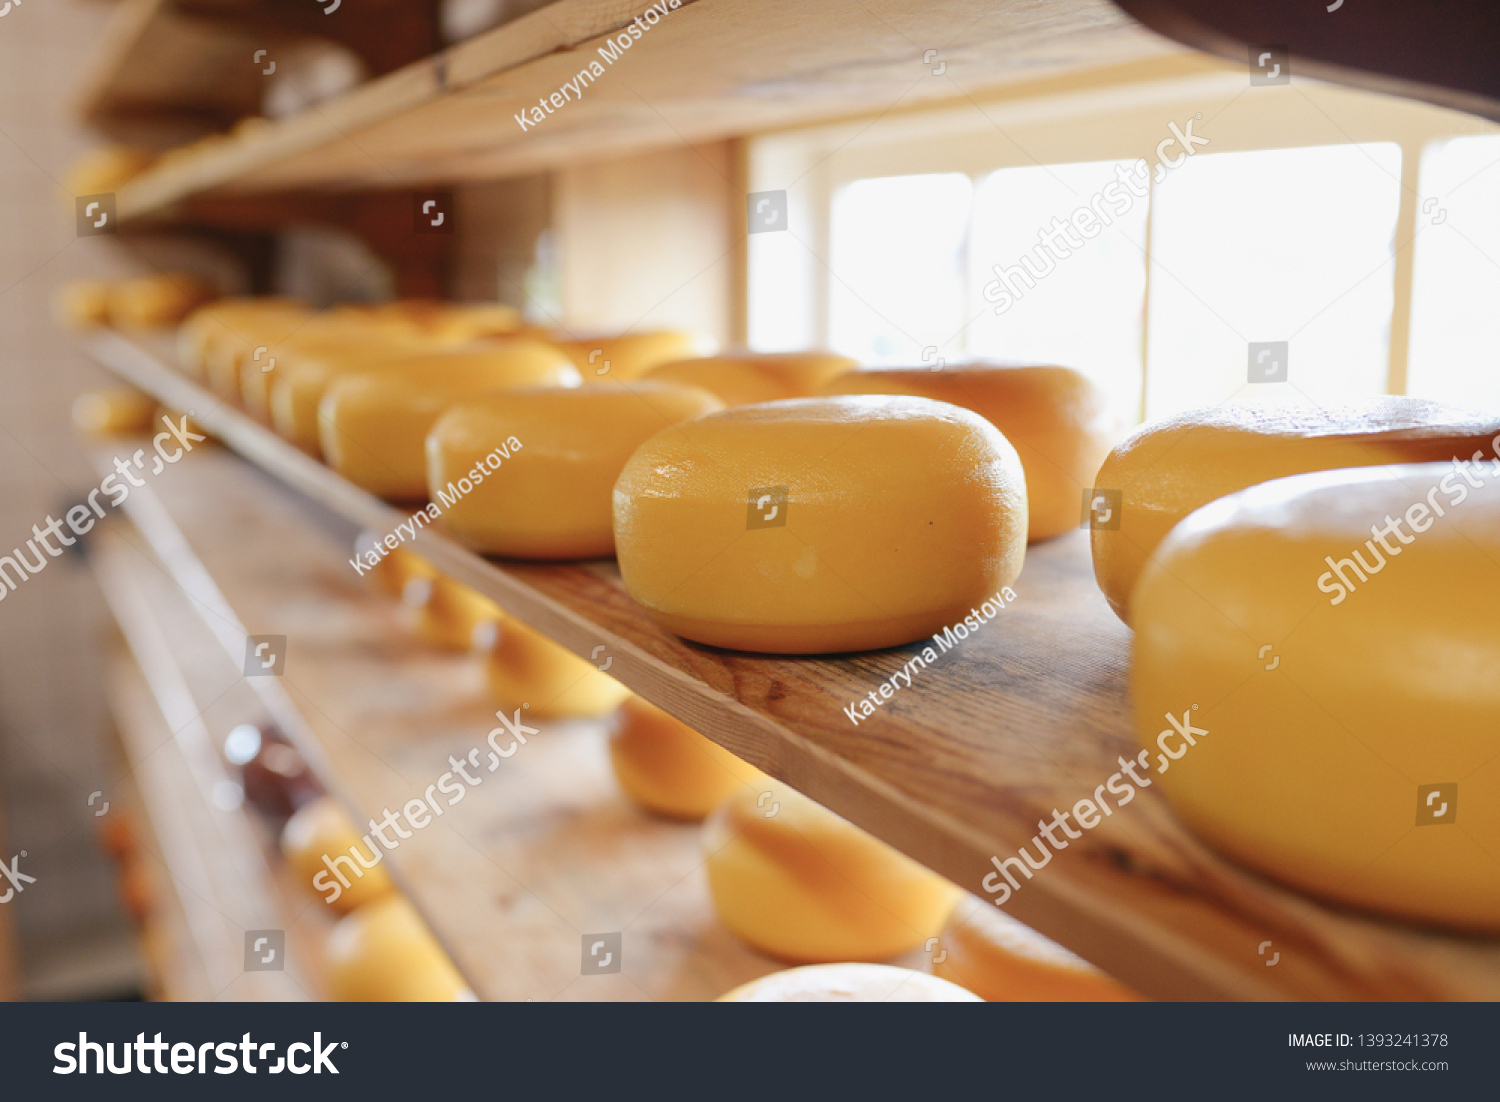 Process of producing in dairy industry - fresh produced cheese in a cheesery on the shelf (for selling) #1393241378